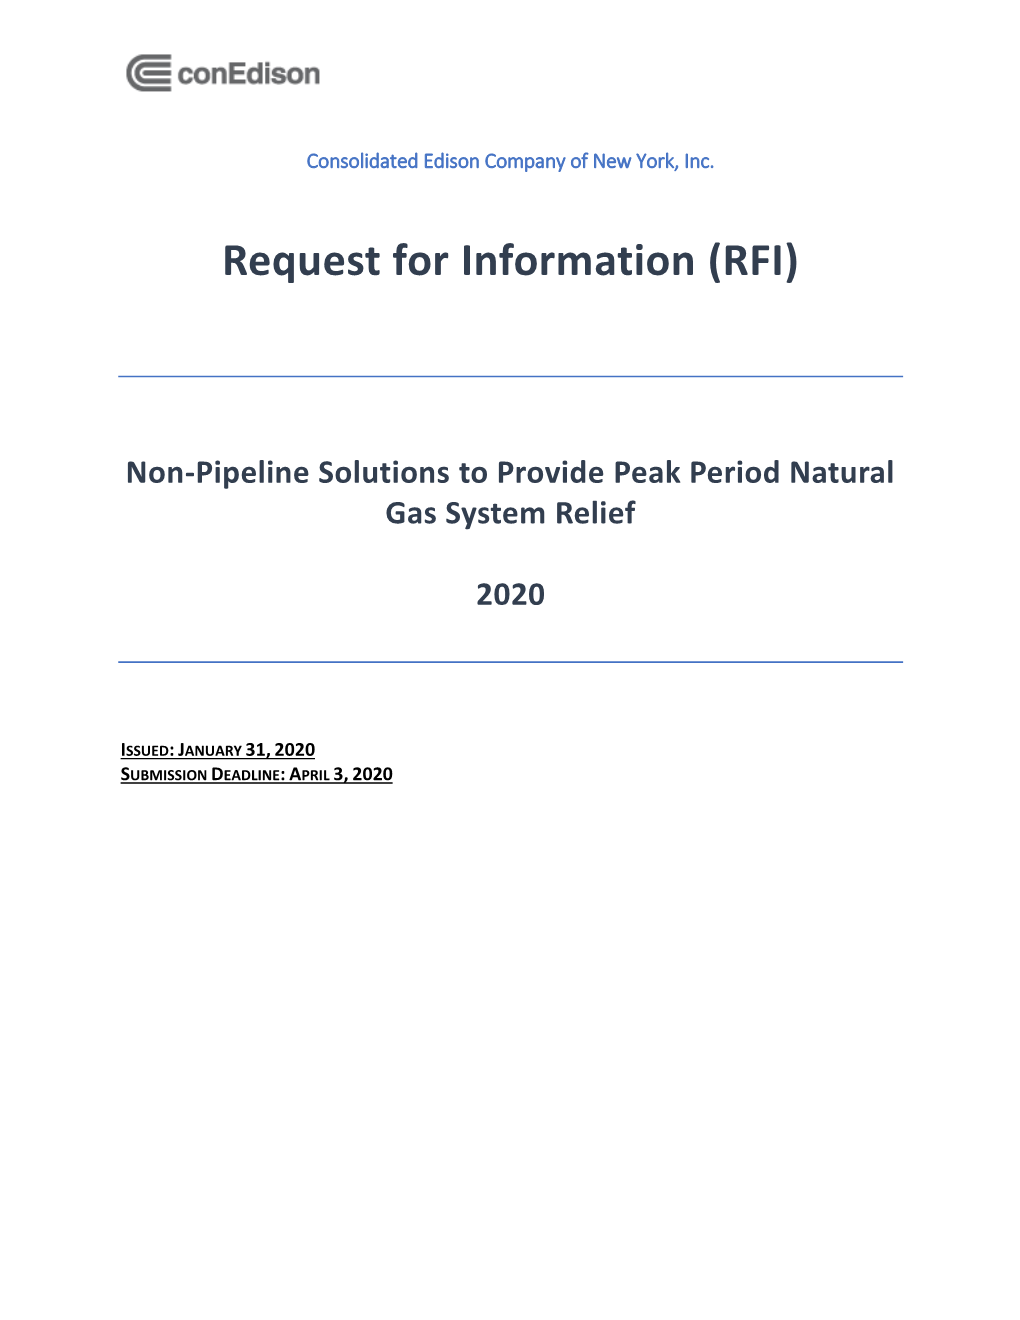 Non-Pipeline Solutions to Provide Peak Period Natural Gas System Relief